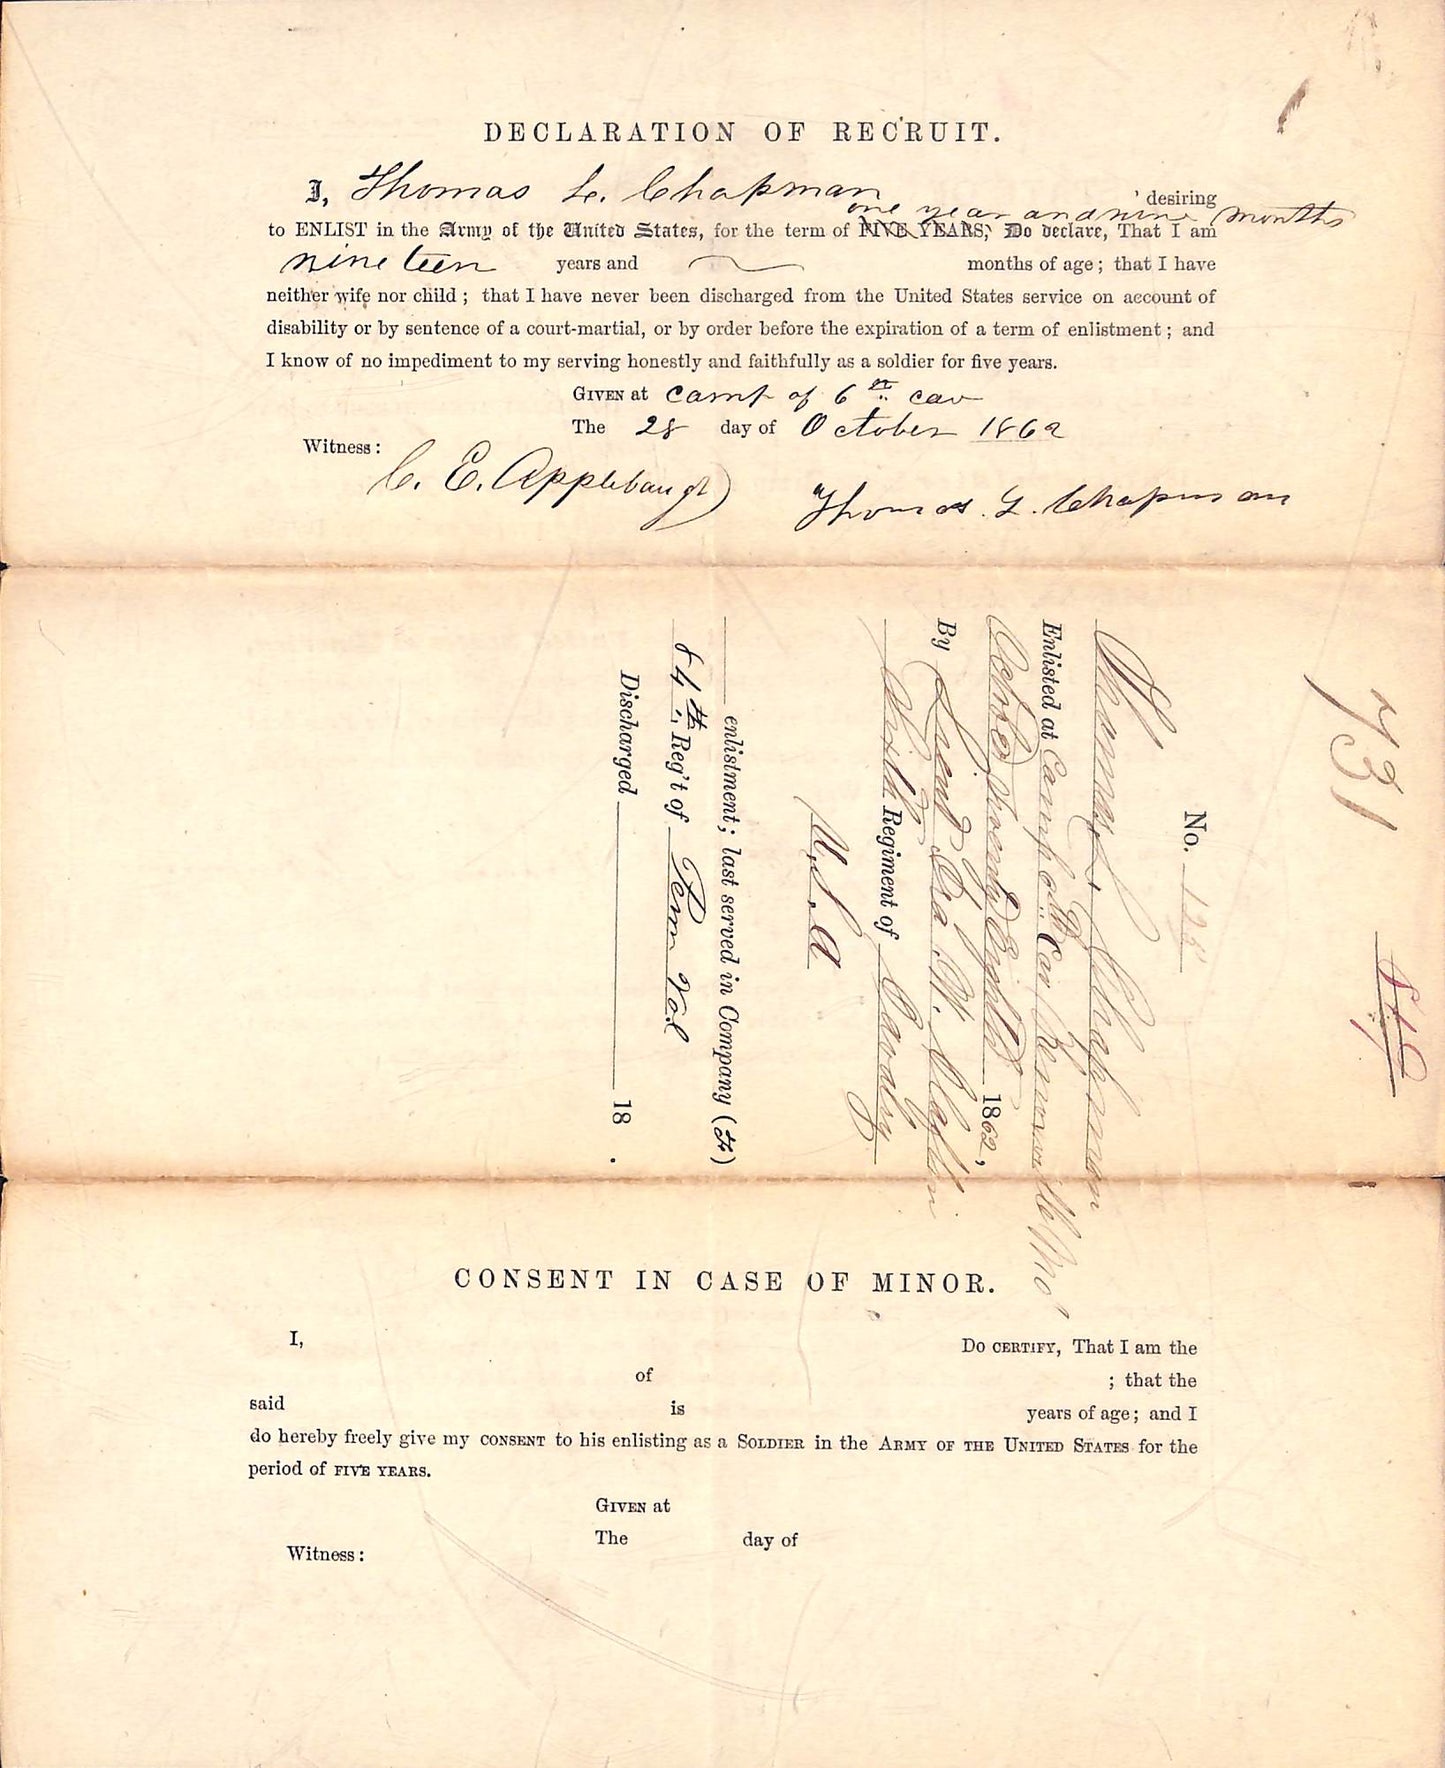 Regular army Enlistment Papers